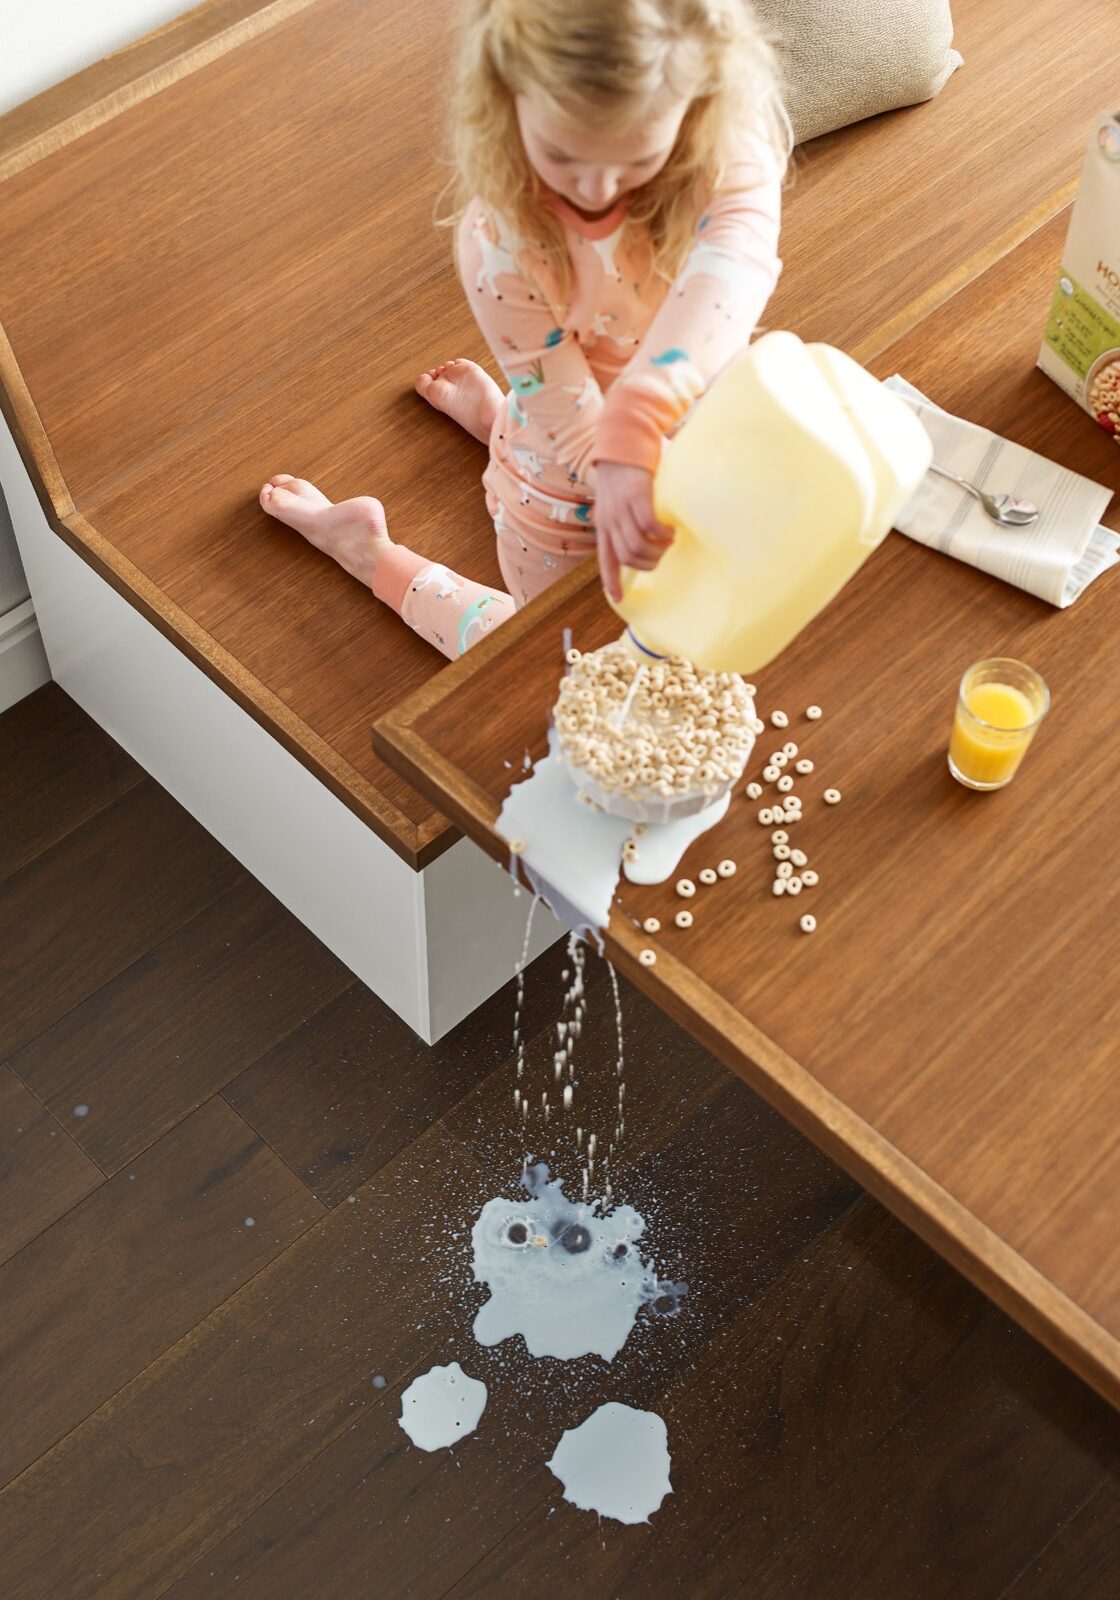 Milk spill cleaning | Sheridan Floor To Ceiling